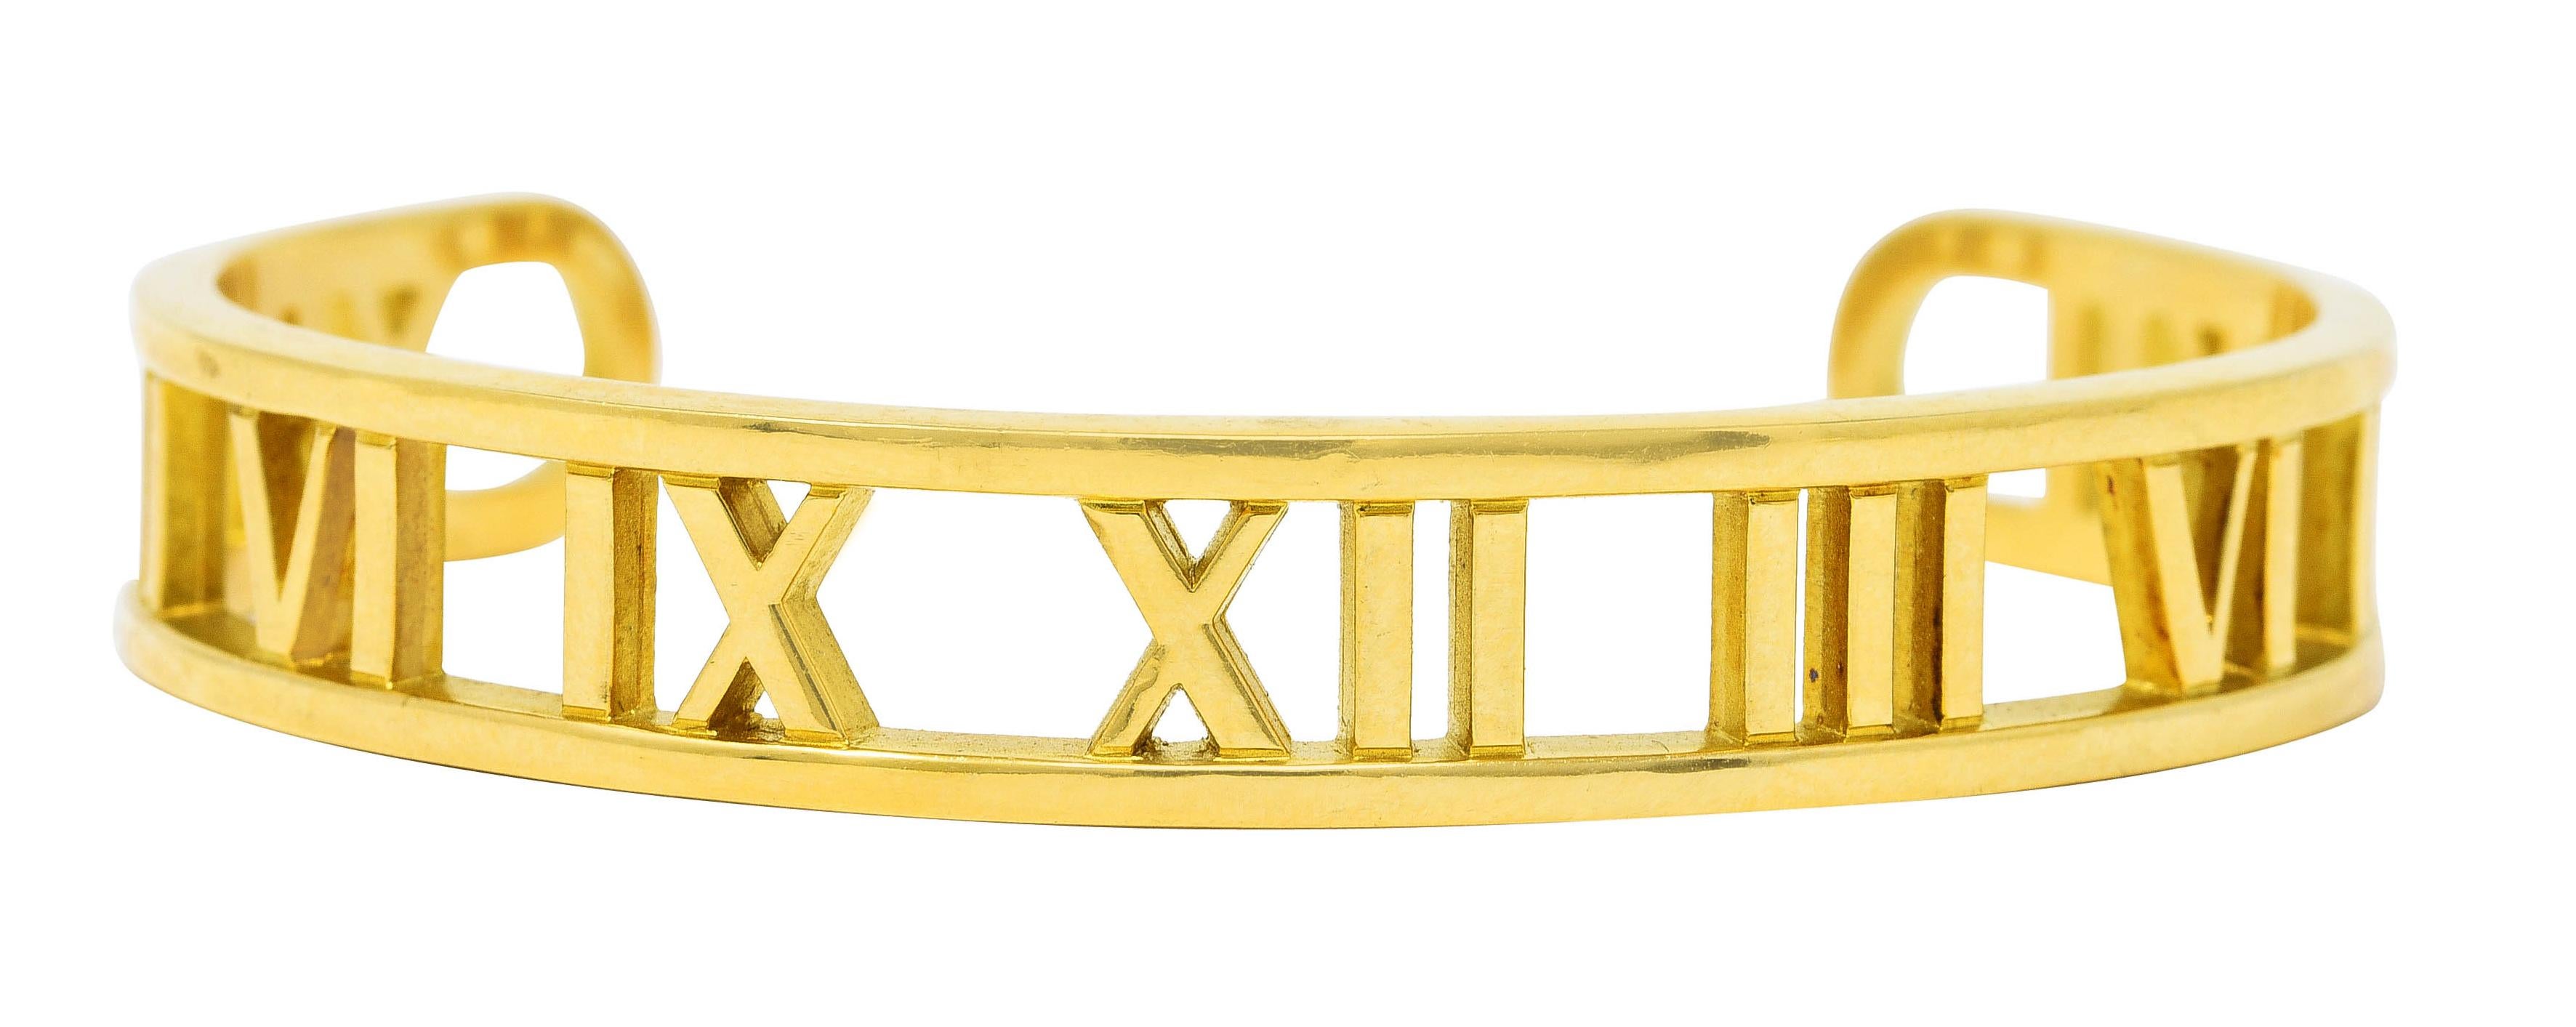 Cuff bracelet is designed as a contoured channel centering pierced roman numerals

Featuring a high polished gold finish

Completed by rounded terminals

Stamped 750 for 18 karat gold

Fully signed Tiffany & Co. Italy

Circa: Dated 2003 from the